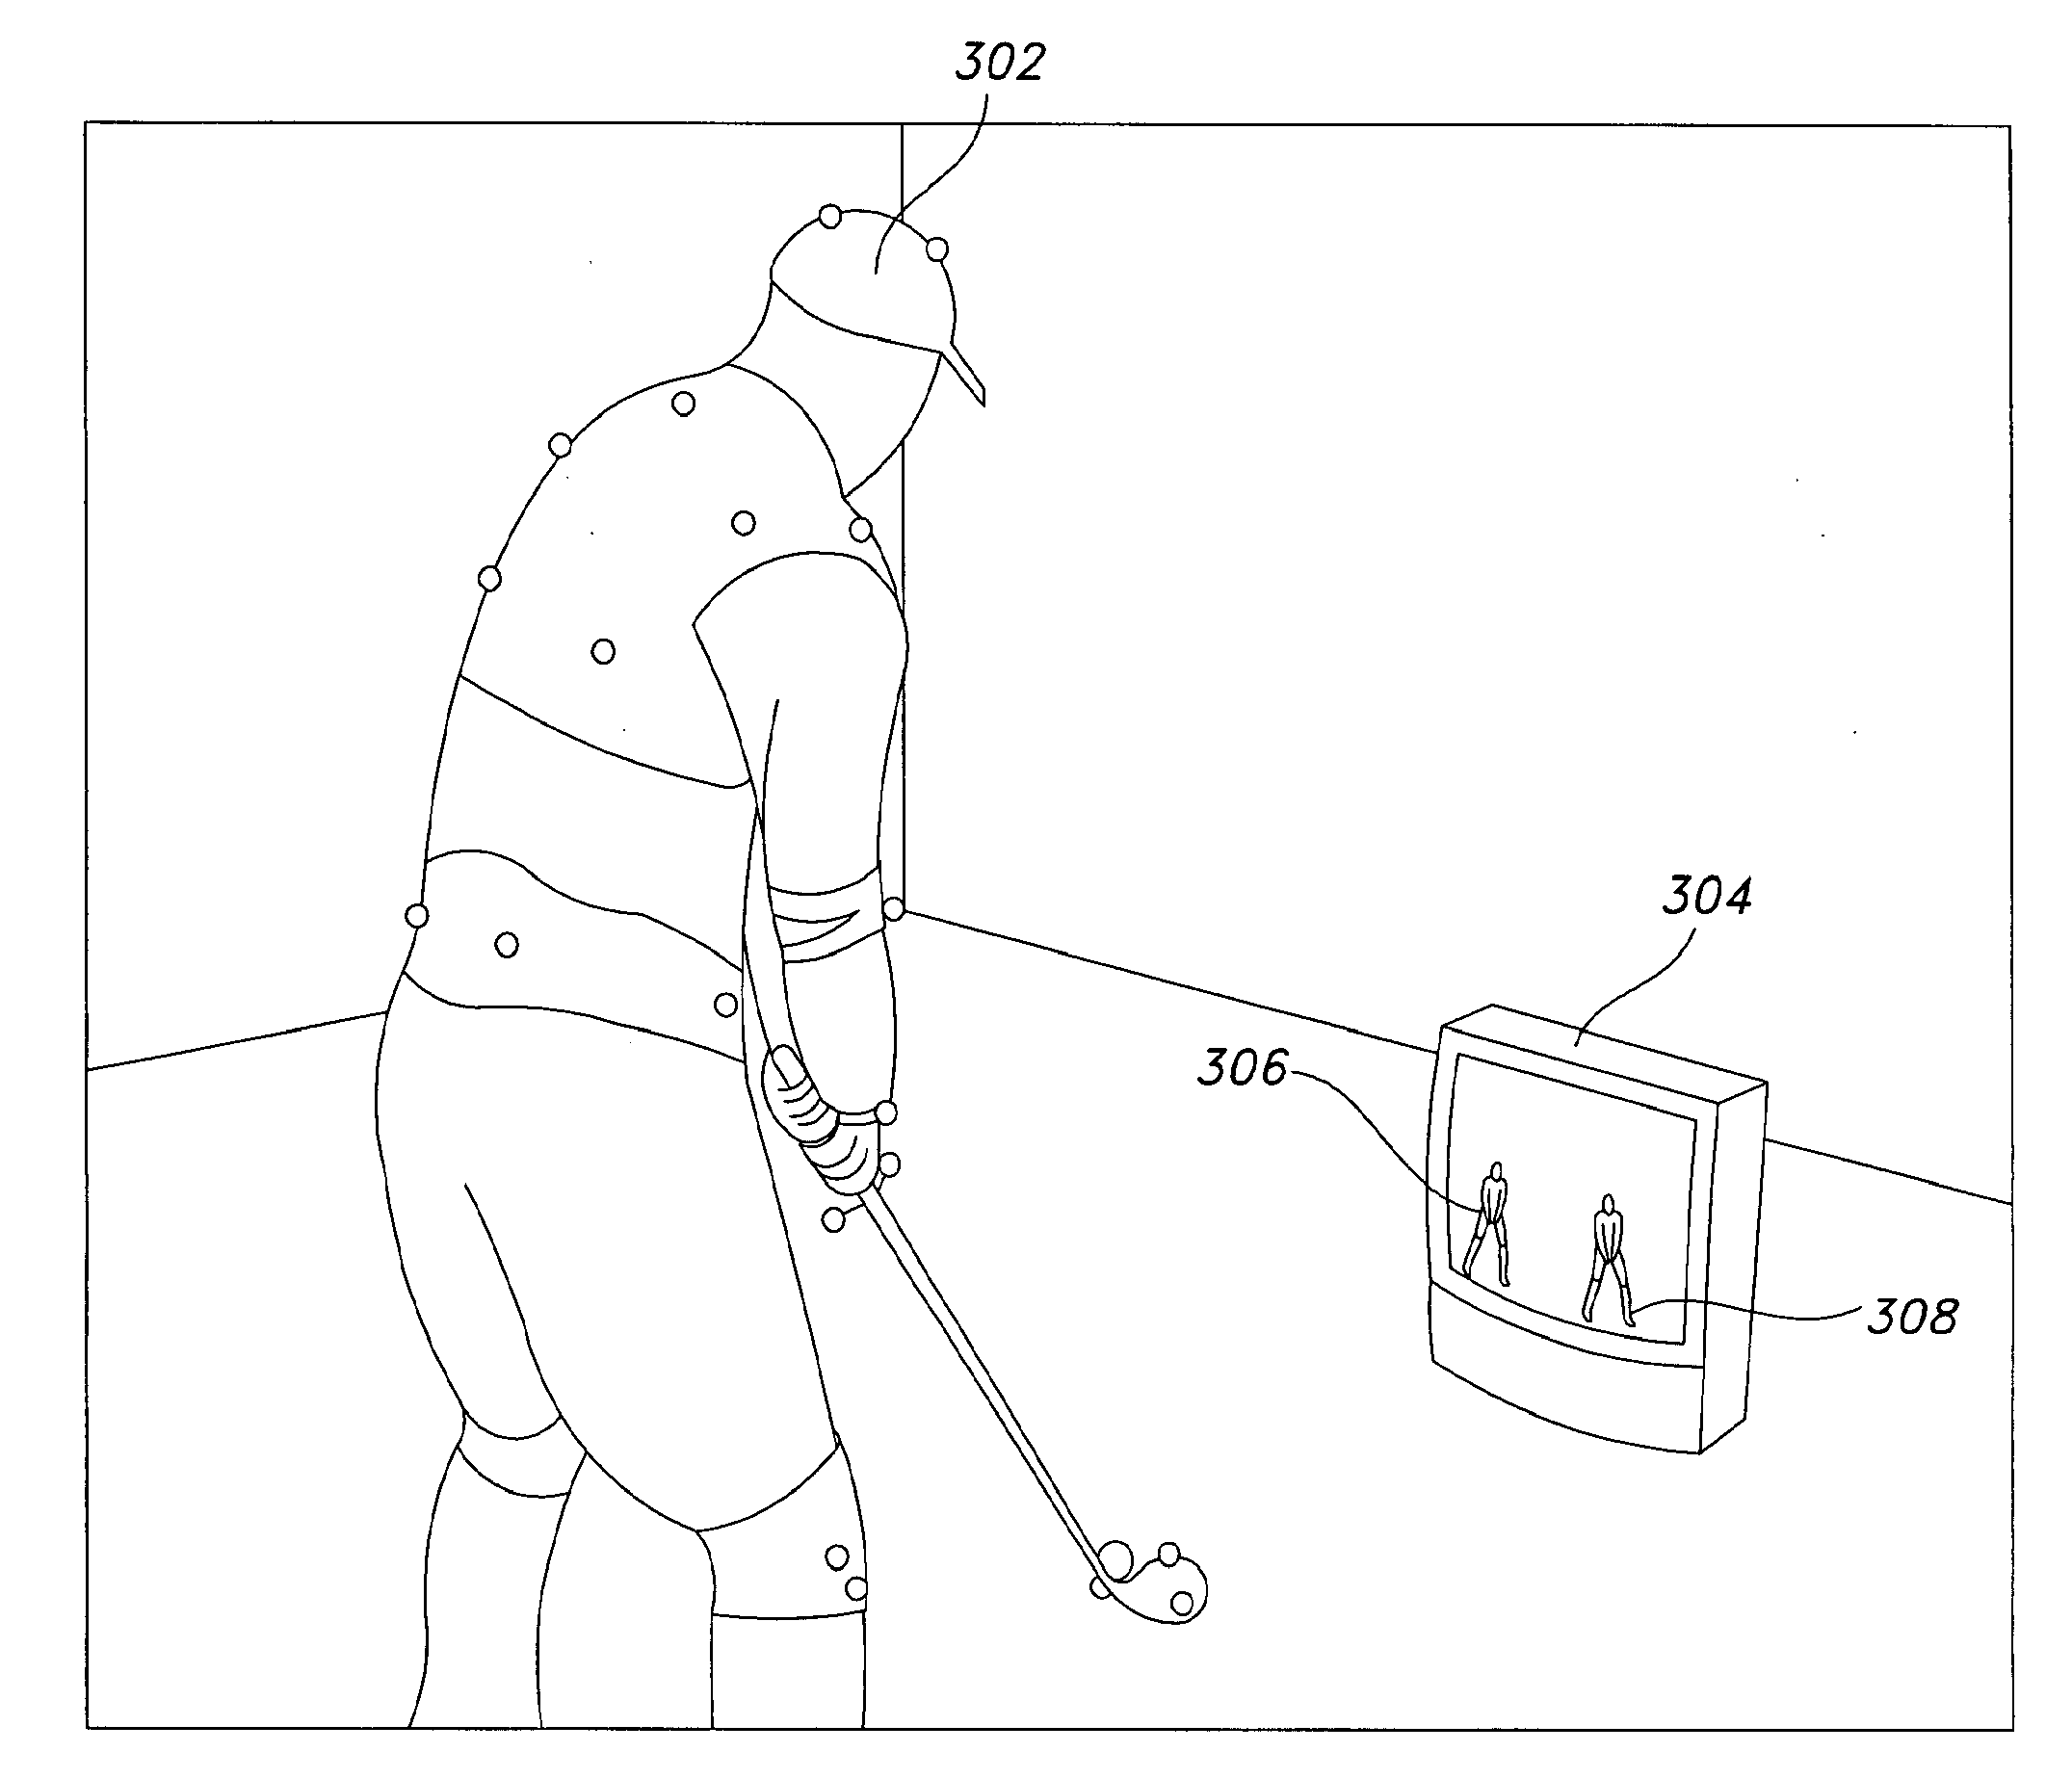 System and Method for Motion Capture